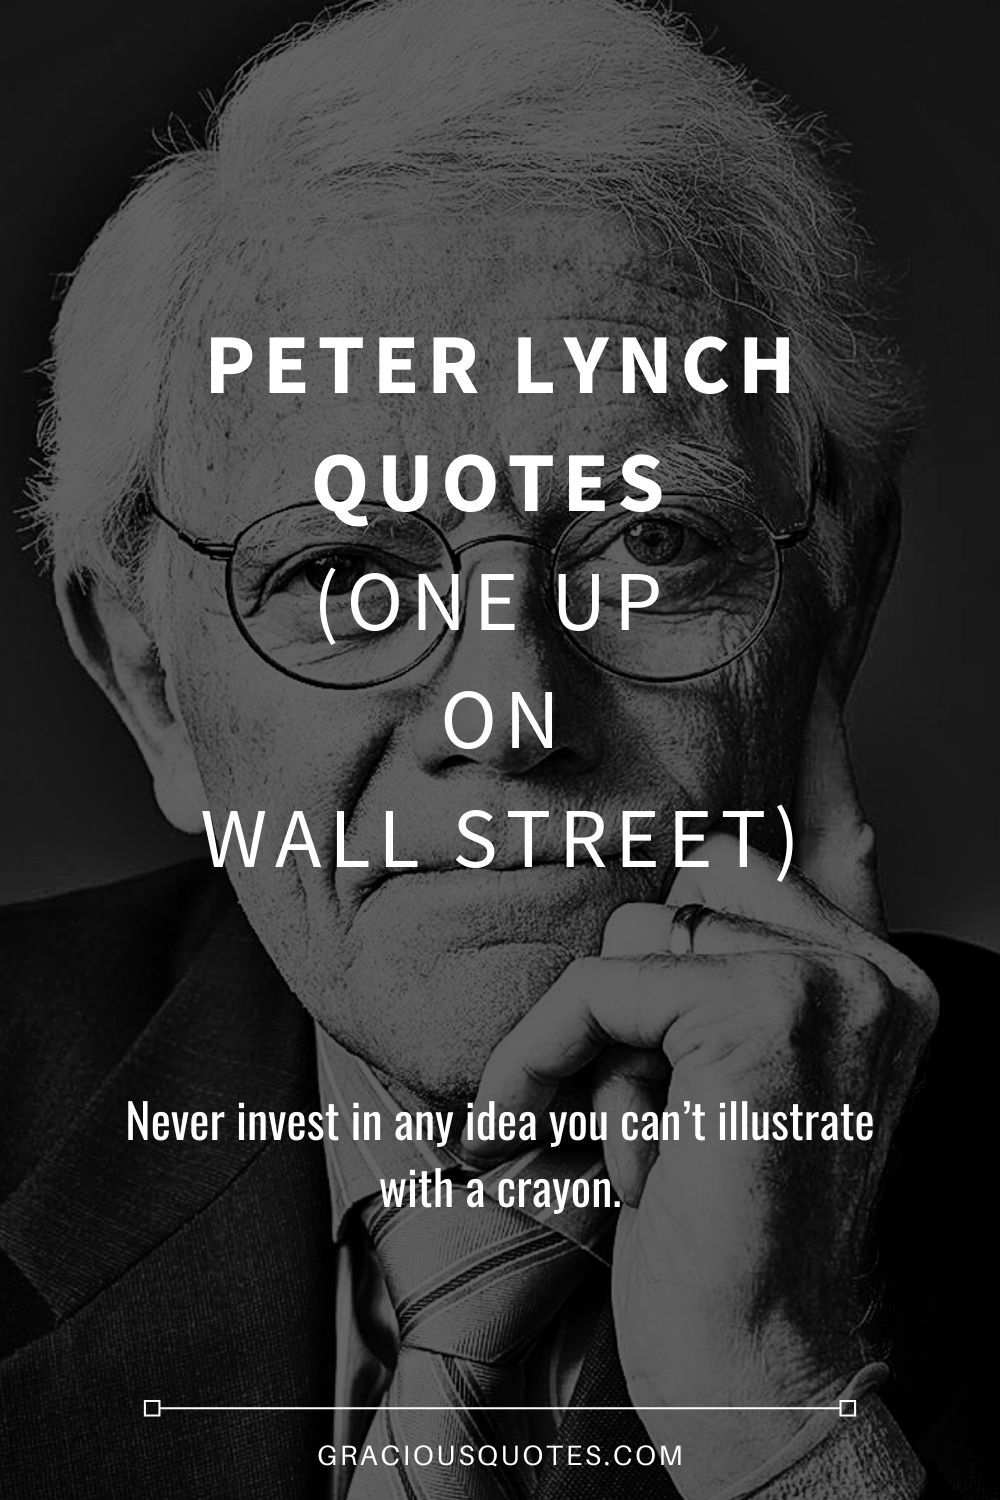 Peter Lynch Quotes (ONE UP ON WALL STREET) - Gracious Quotes